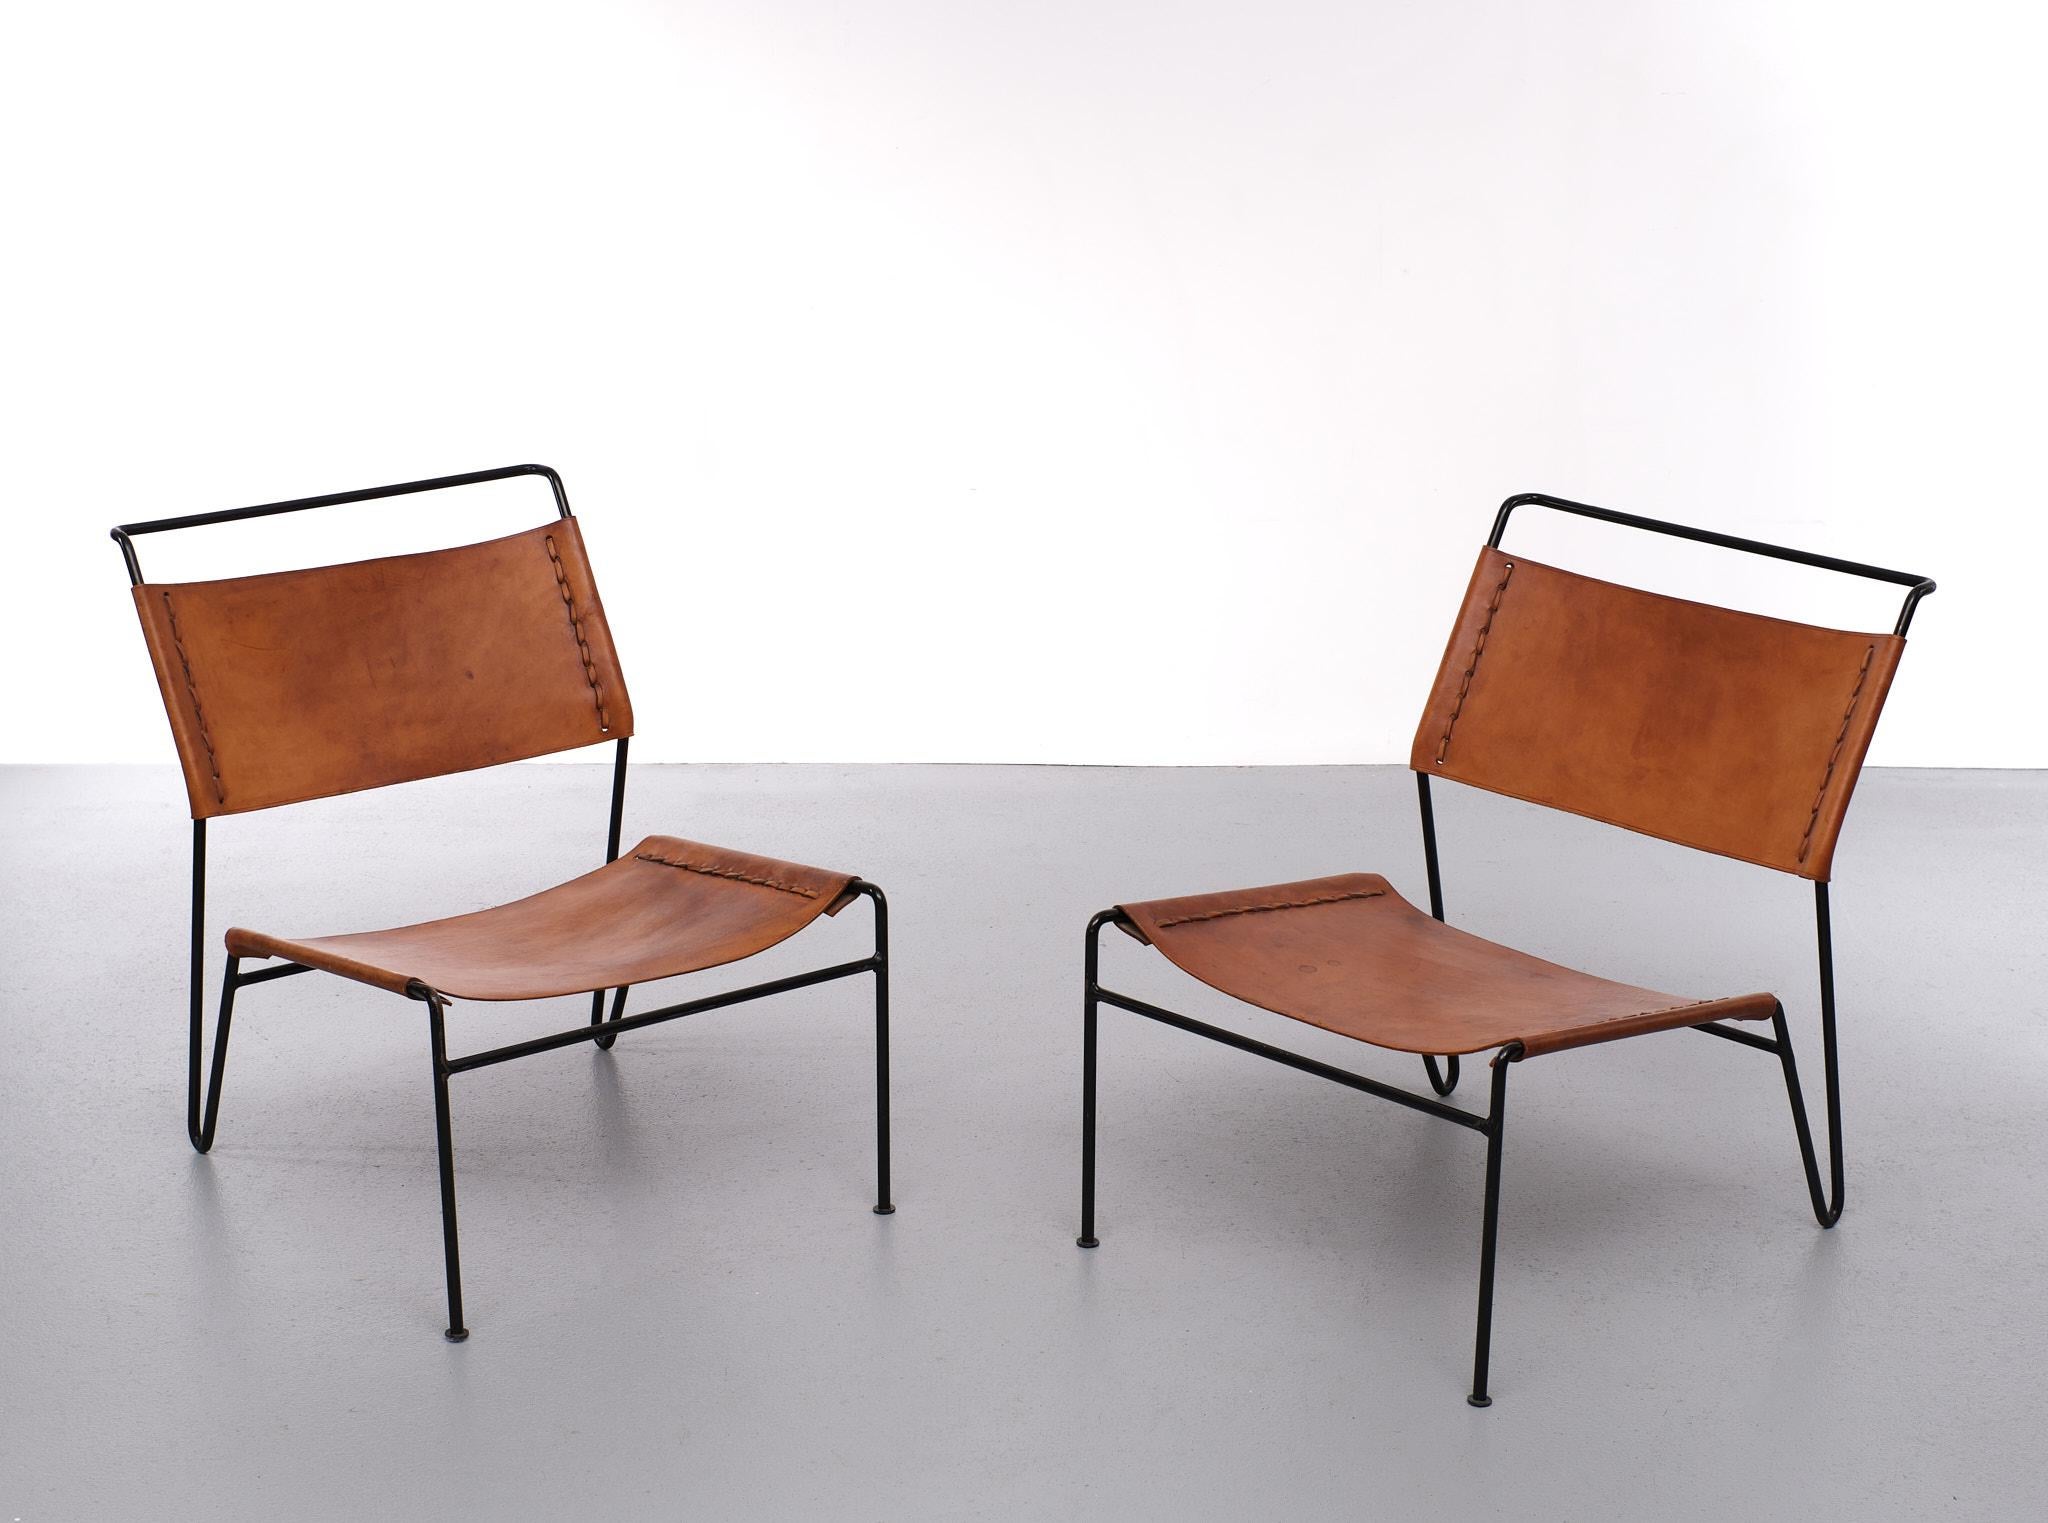 Dutch Pair of A. Dolleman Chairs for Metz & Co, Netherlands, 1950 For Sale